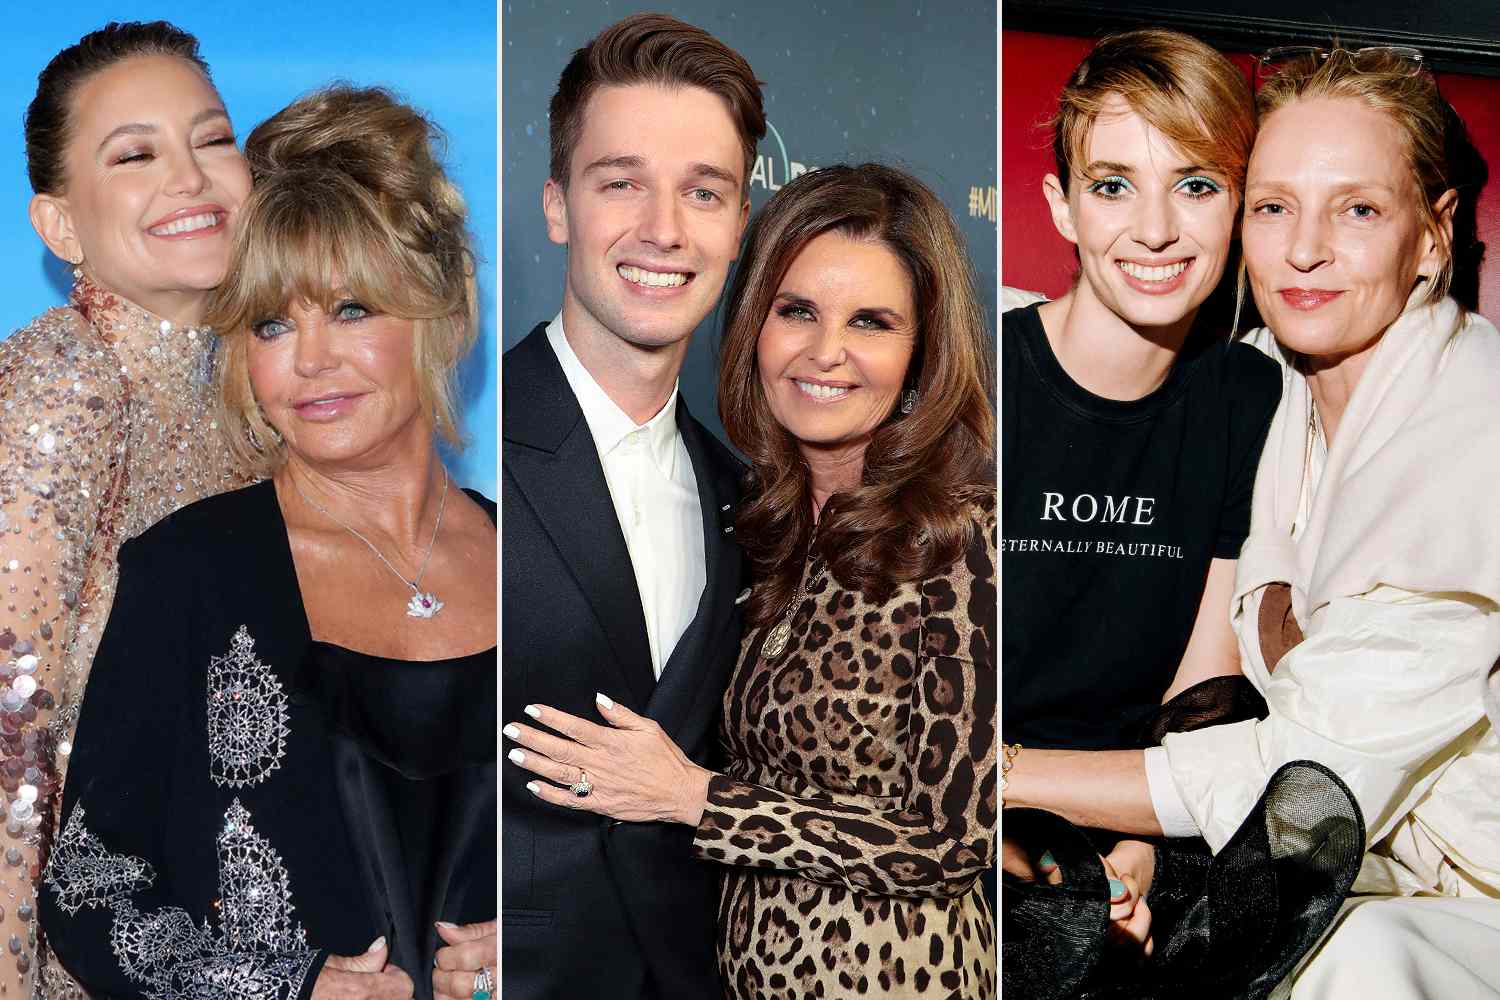 Like mother, like child: 38 famous moms and their celebrity offspring